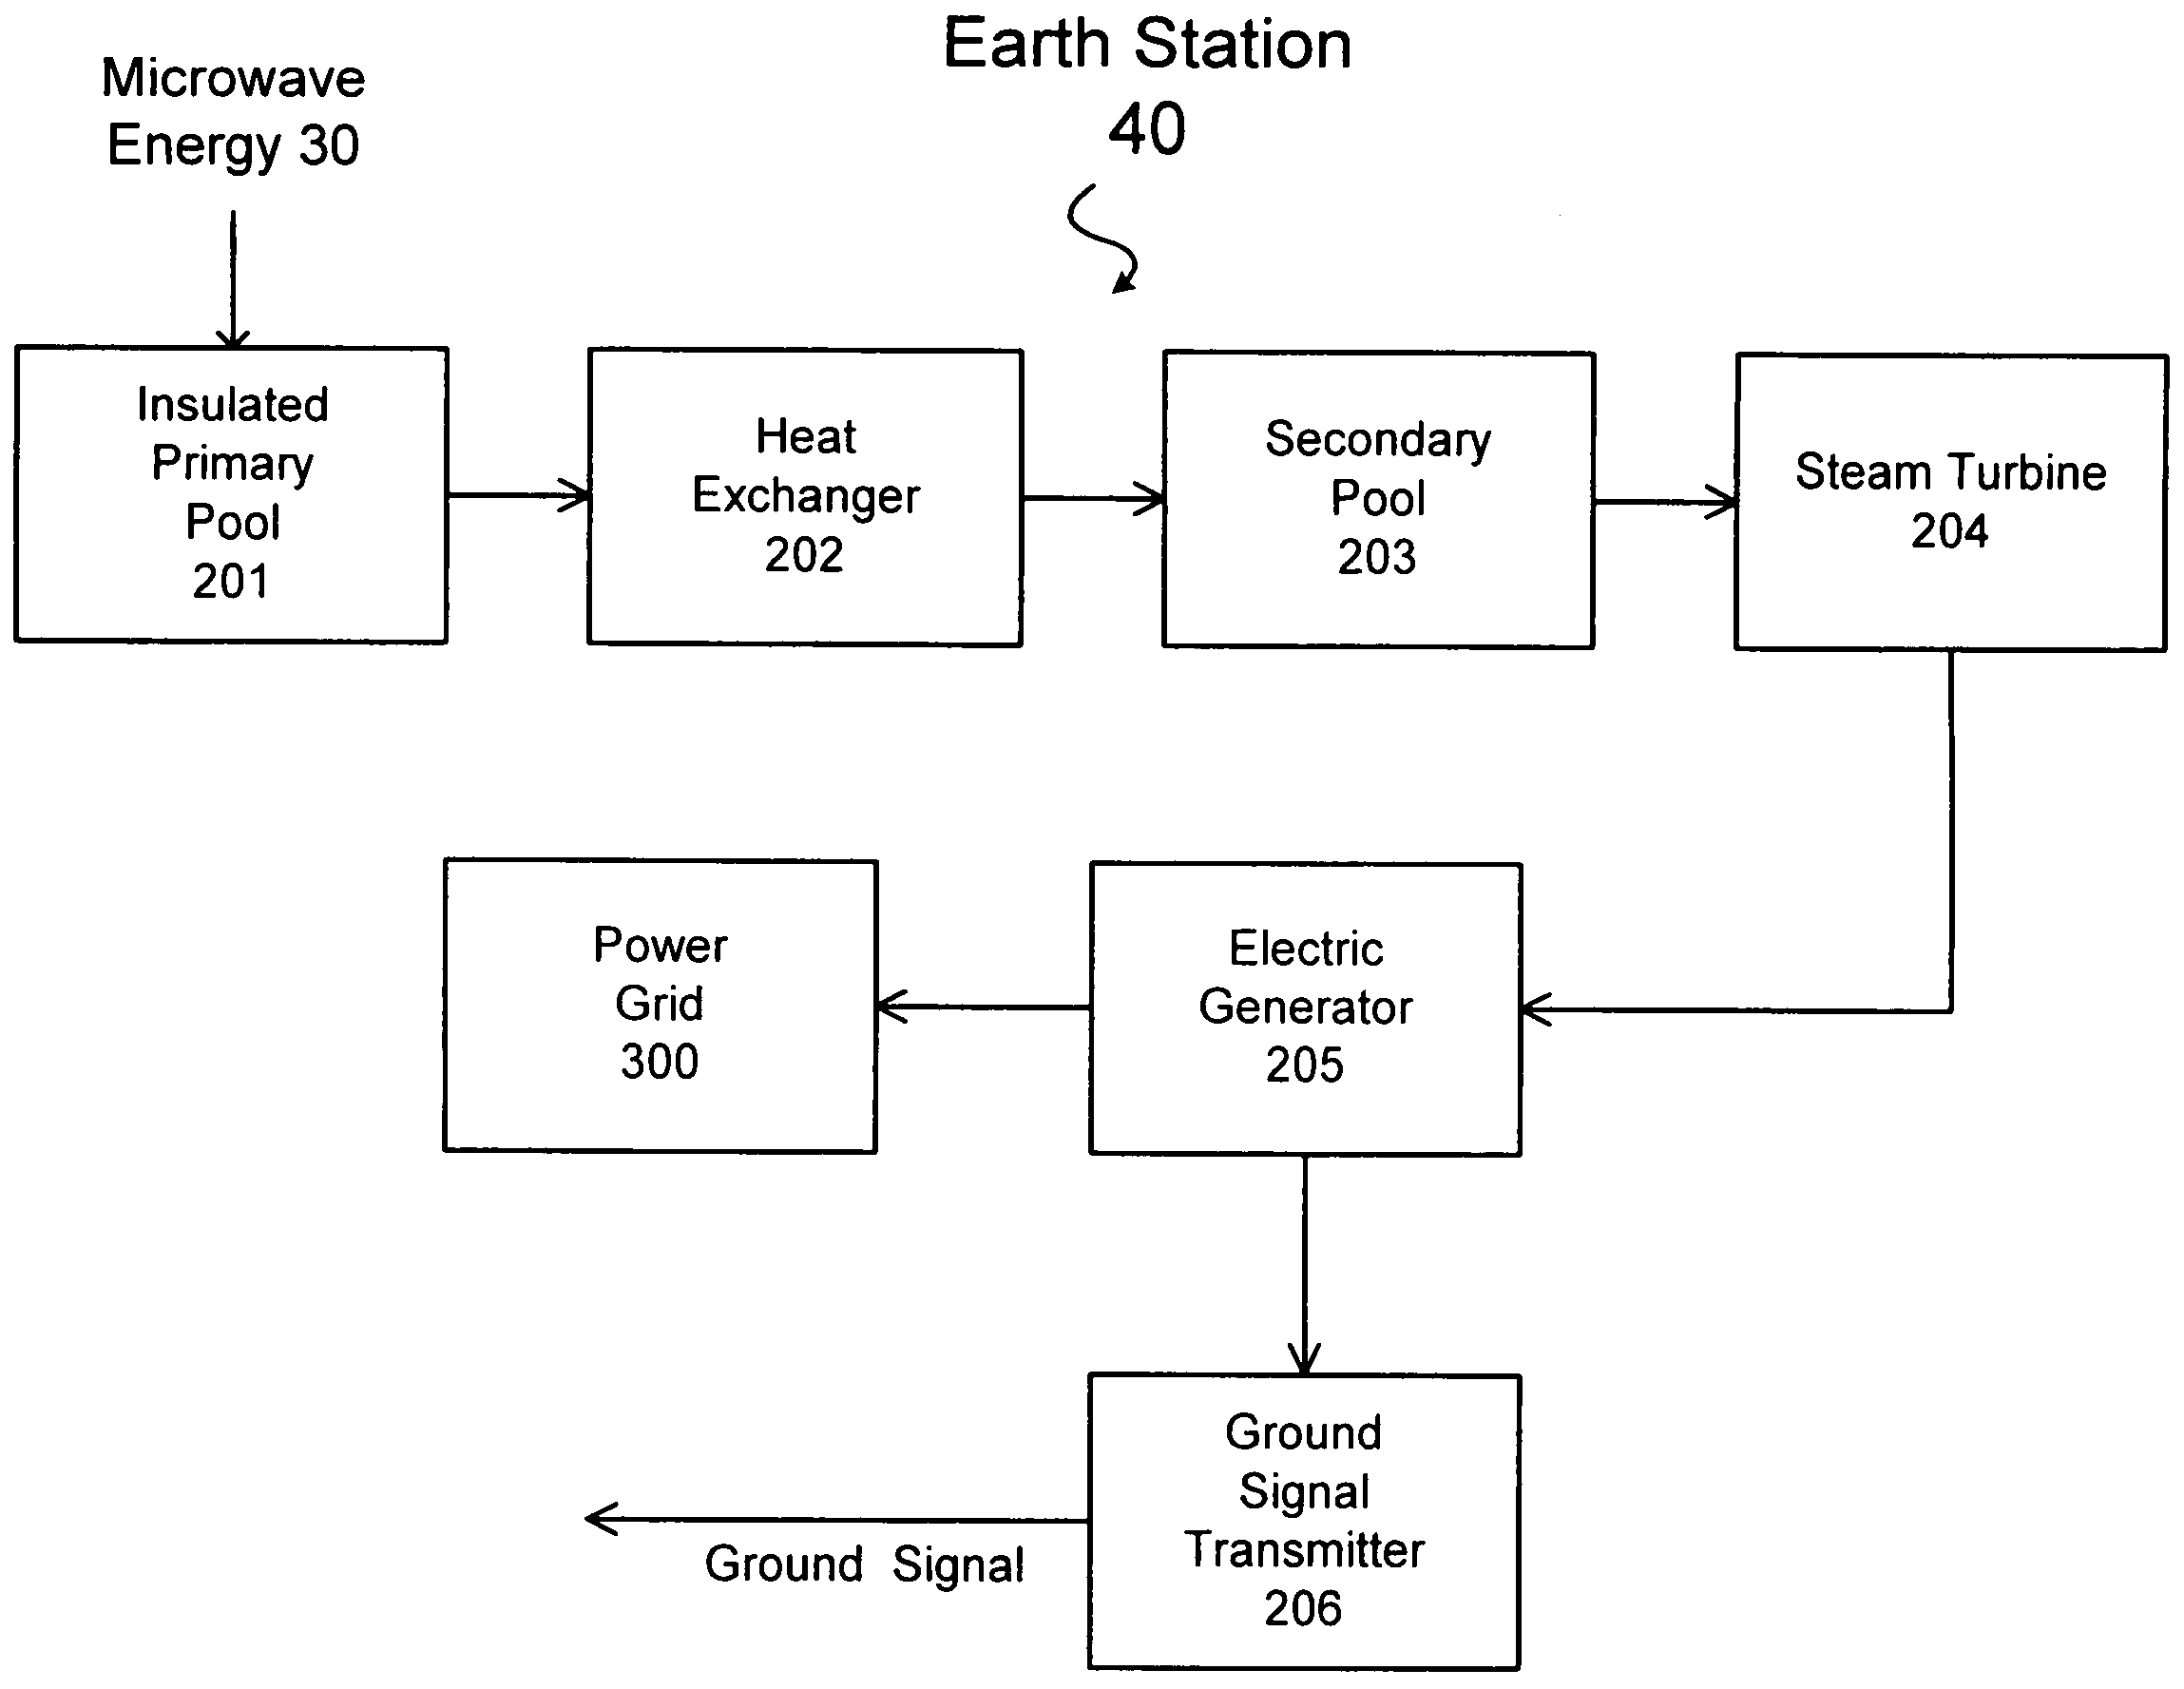 Solar energy conversion and transmission system